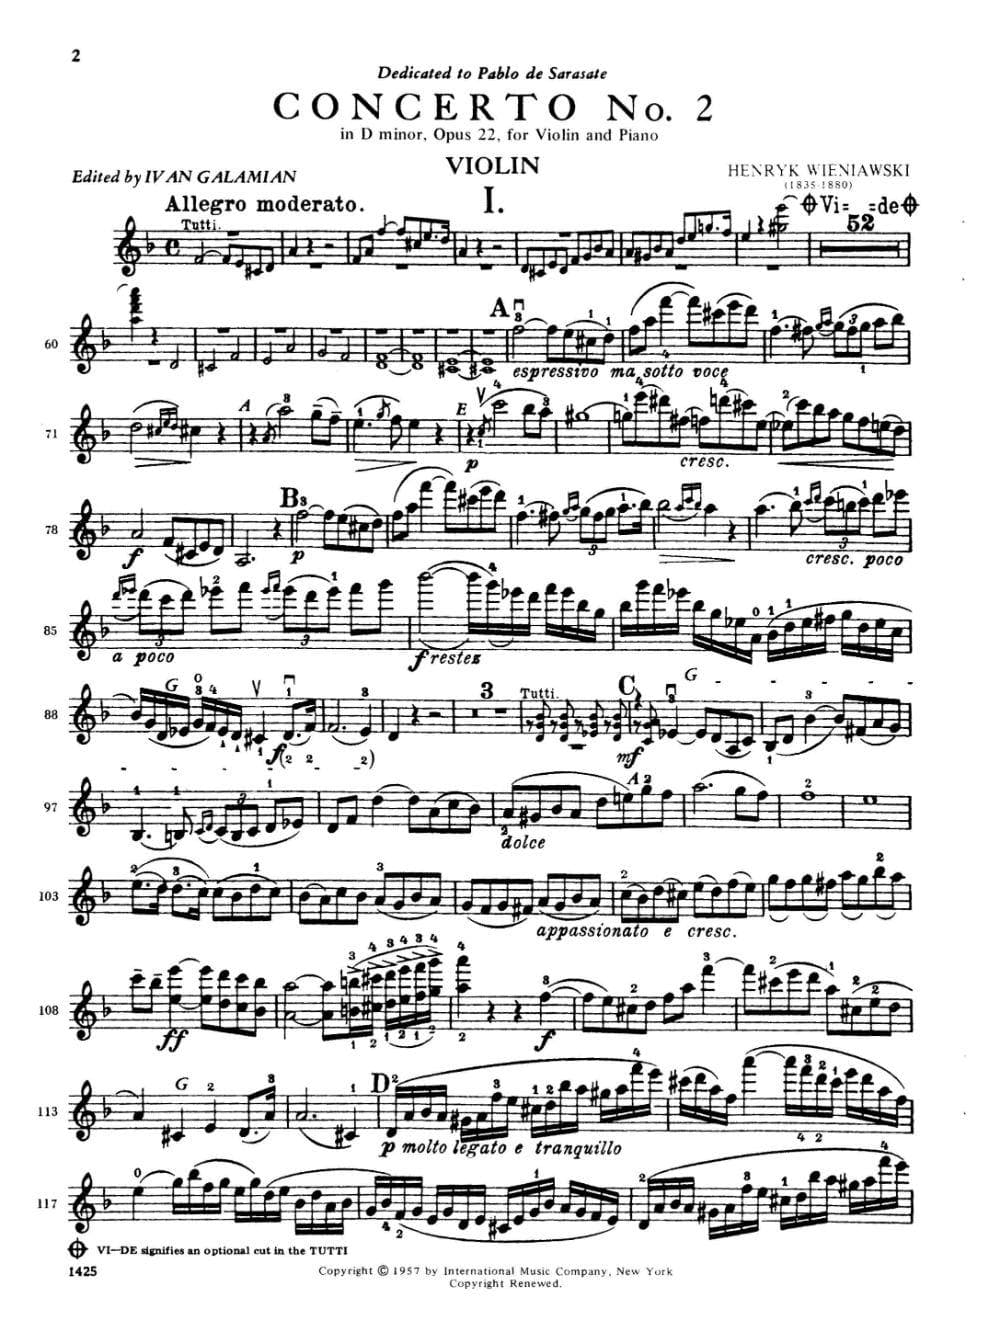 Wieniawski, Henryk - Concerto 2 in d minor, Op 22 For Violin and Piano Edited by Ivan Galamian Published by International Music Company